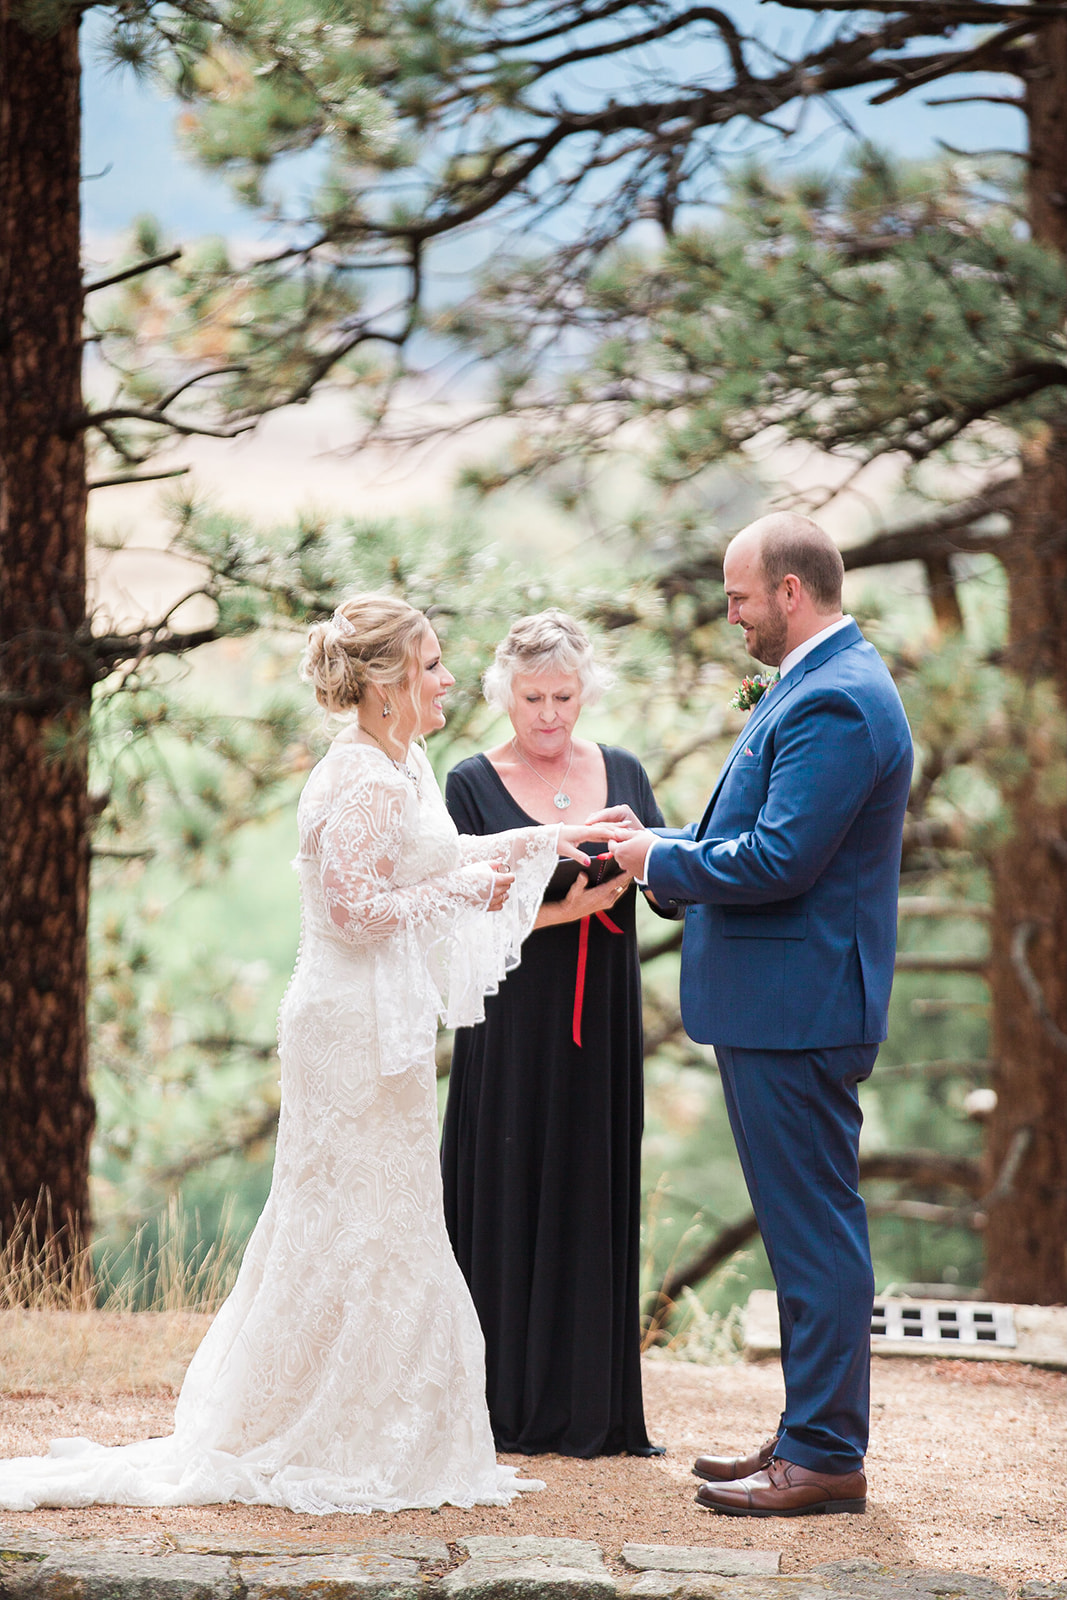 groom gives bride ring in rocky mountain national park elopement ceremony